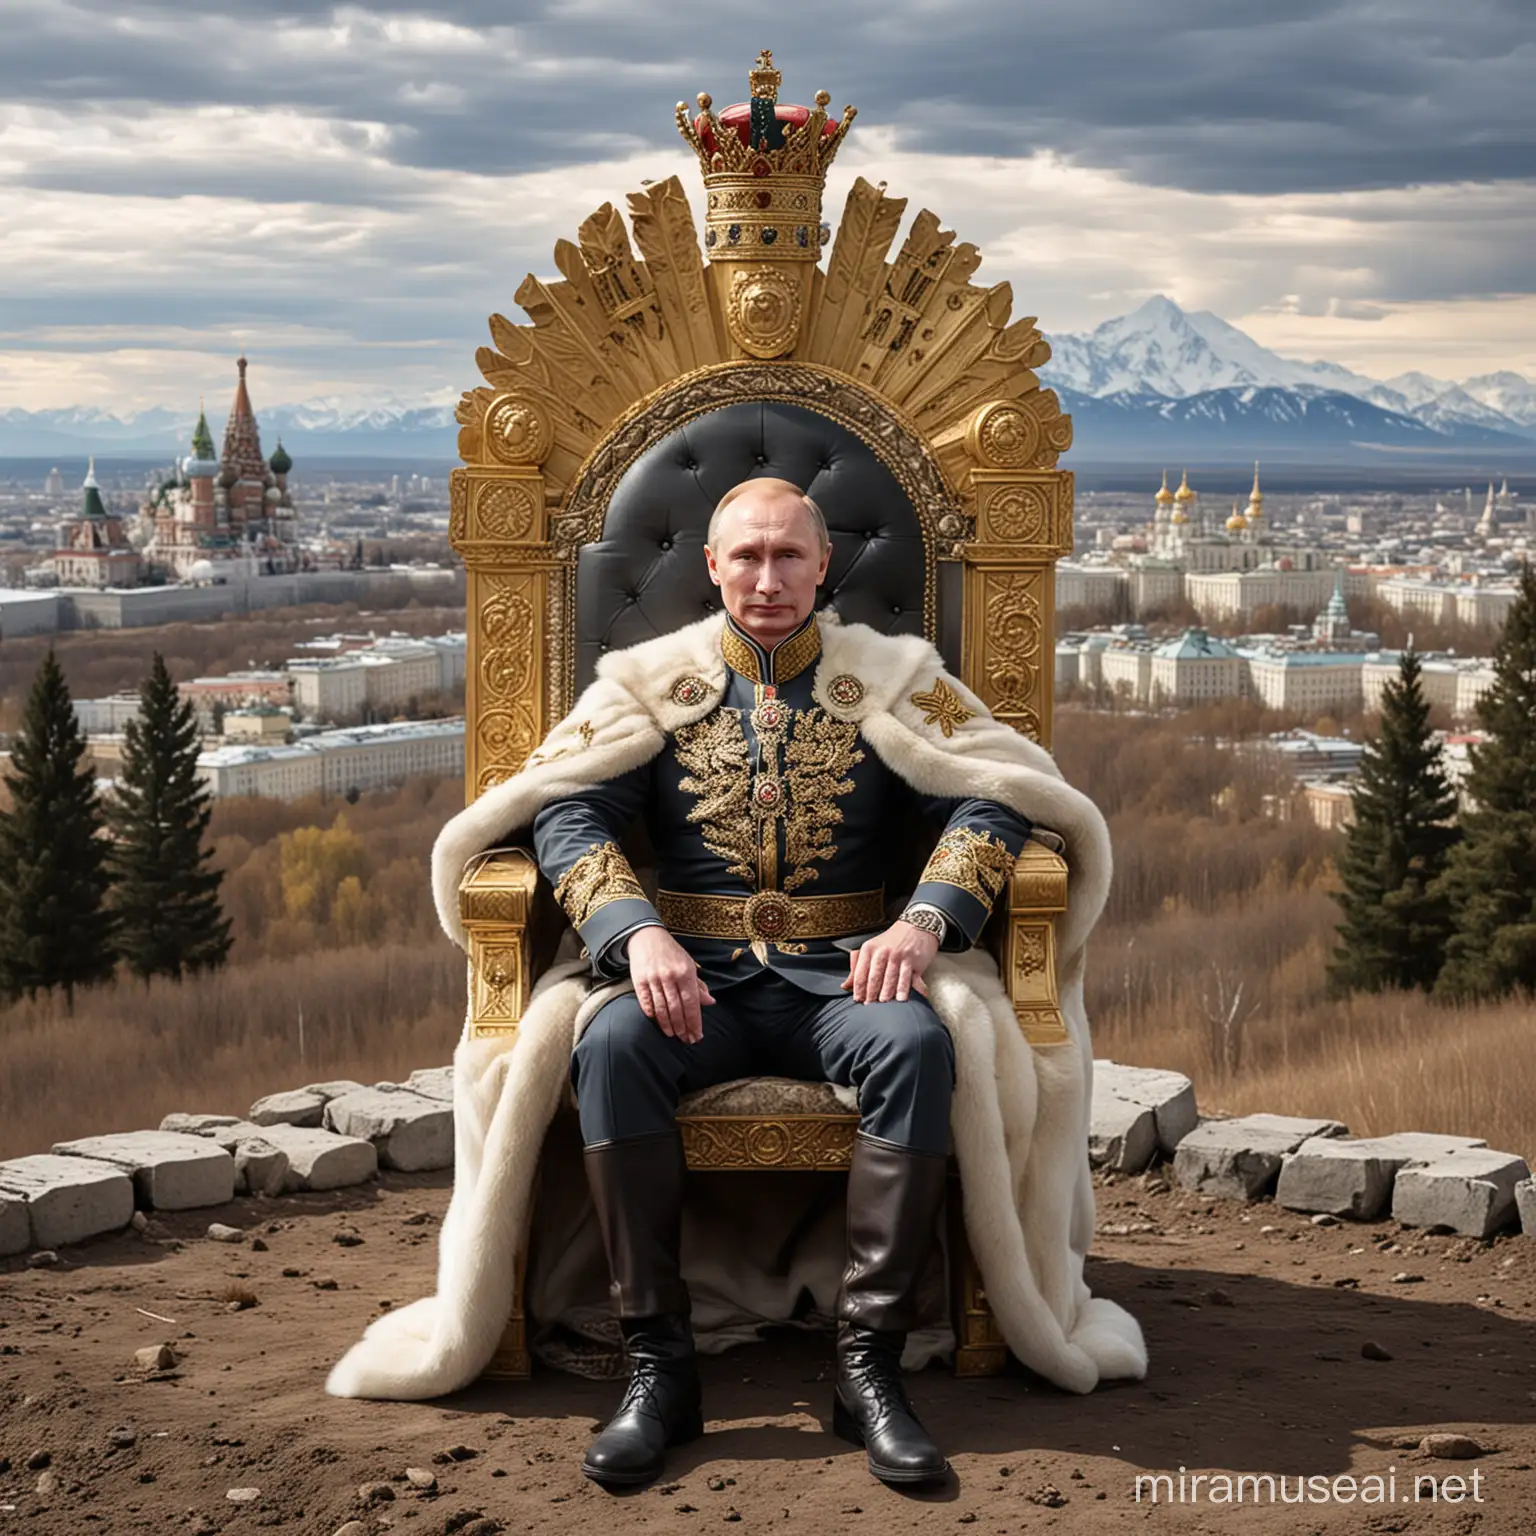 Putin as the king of the world, sitting on earth on his throne. Russia in the background